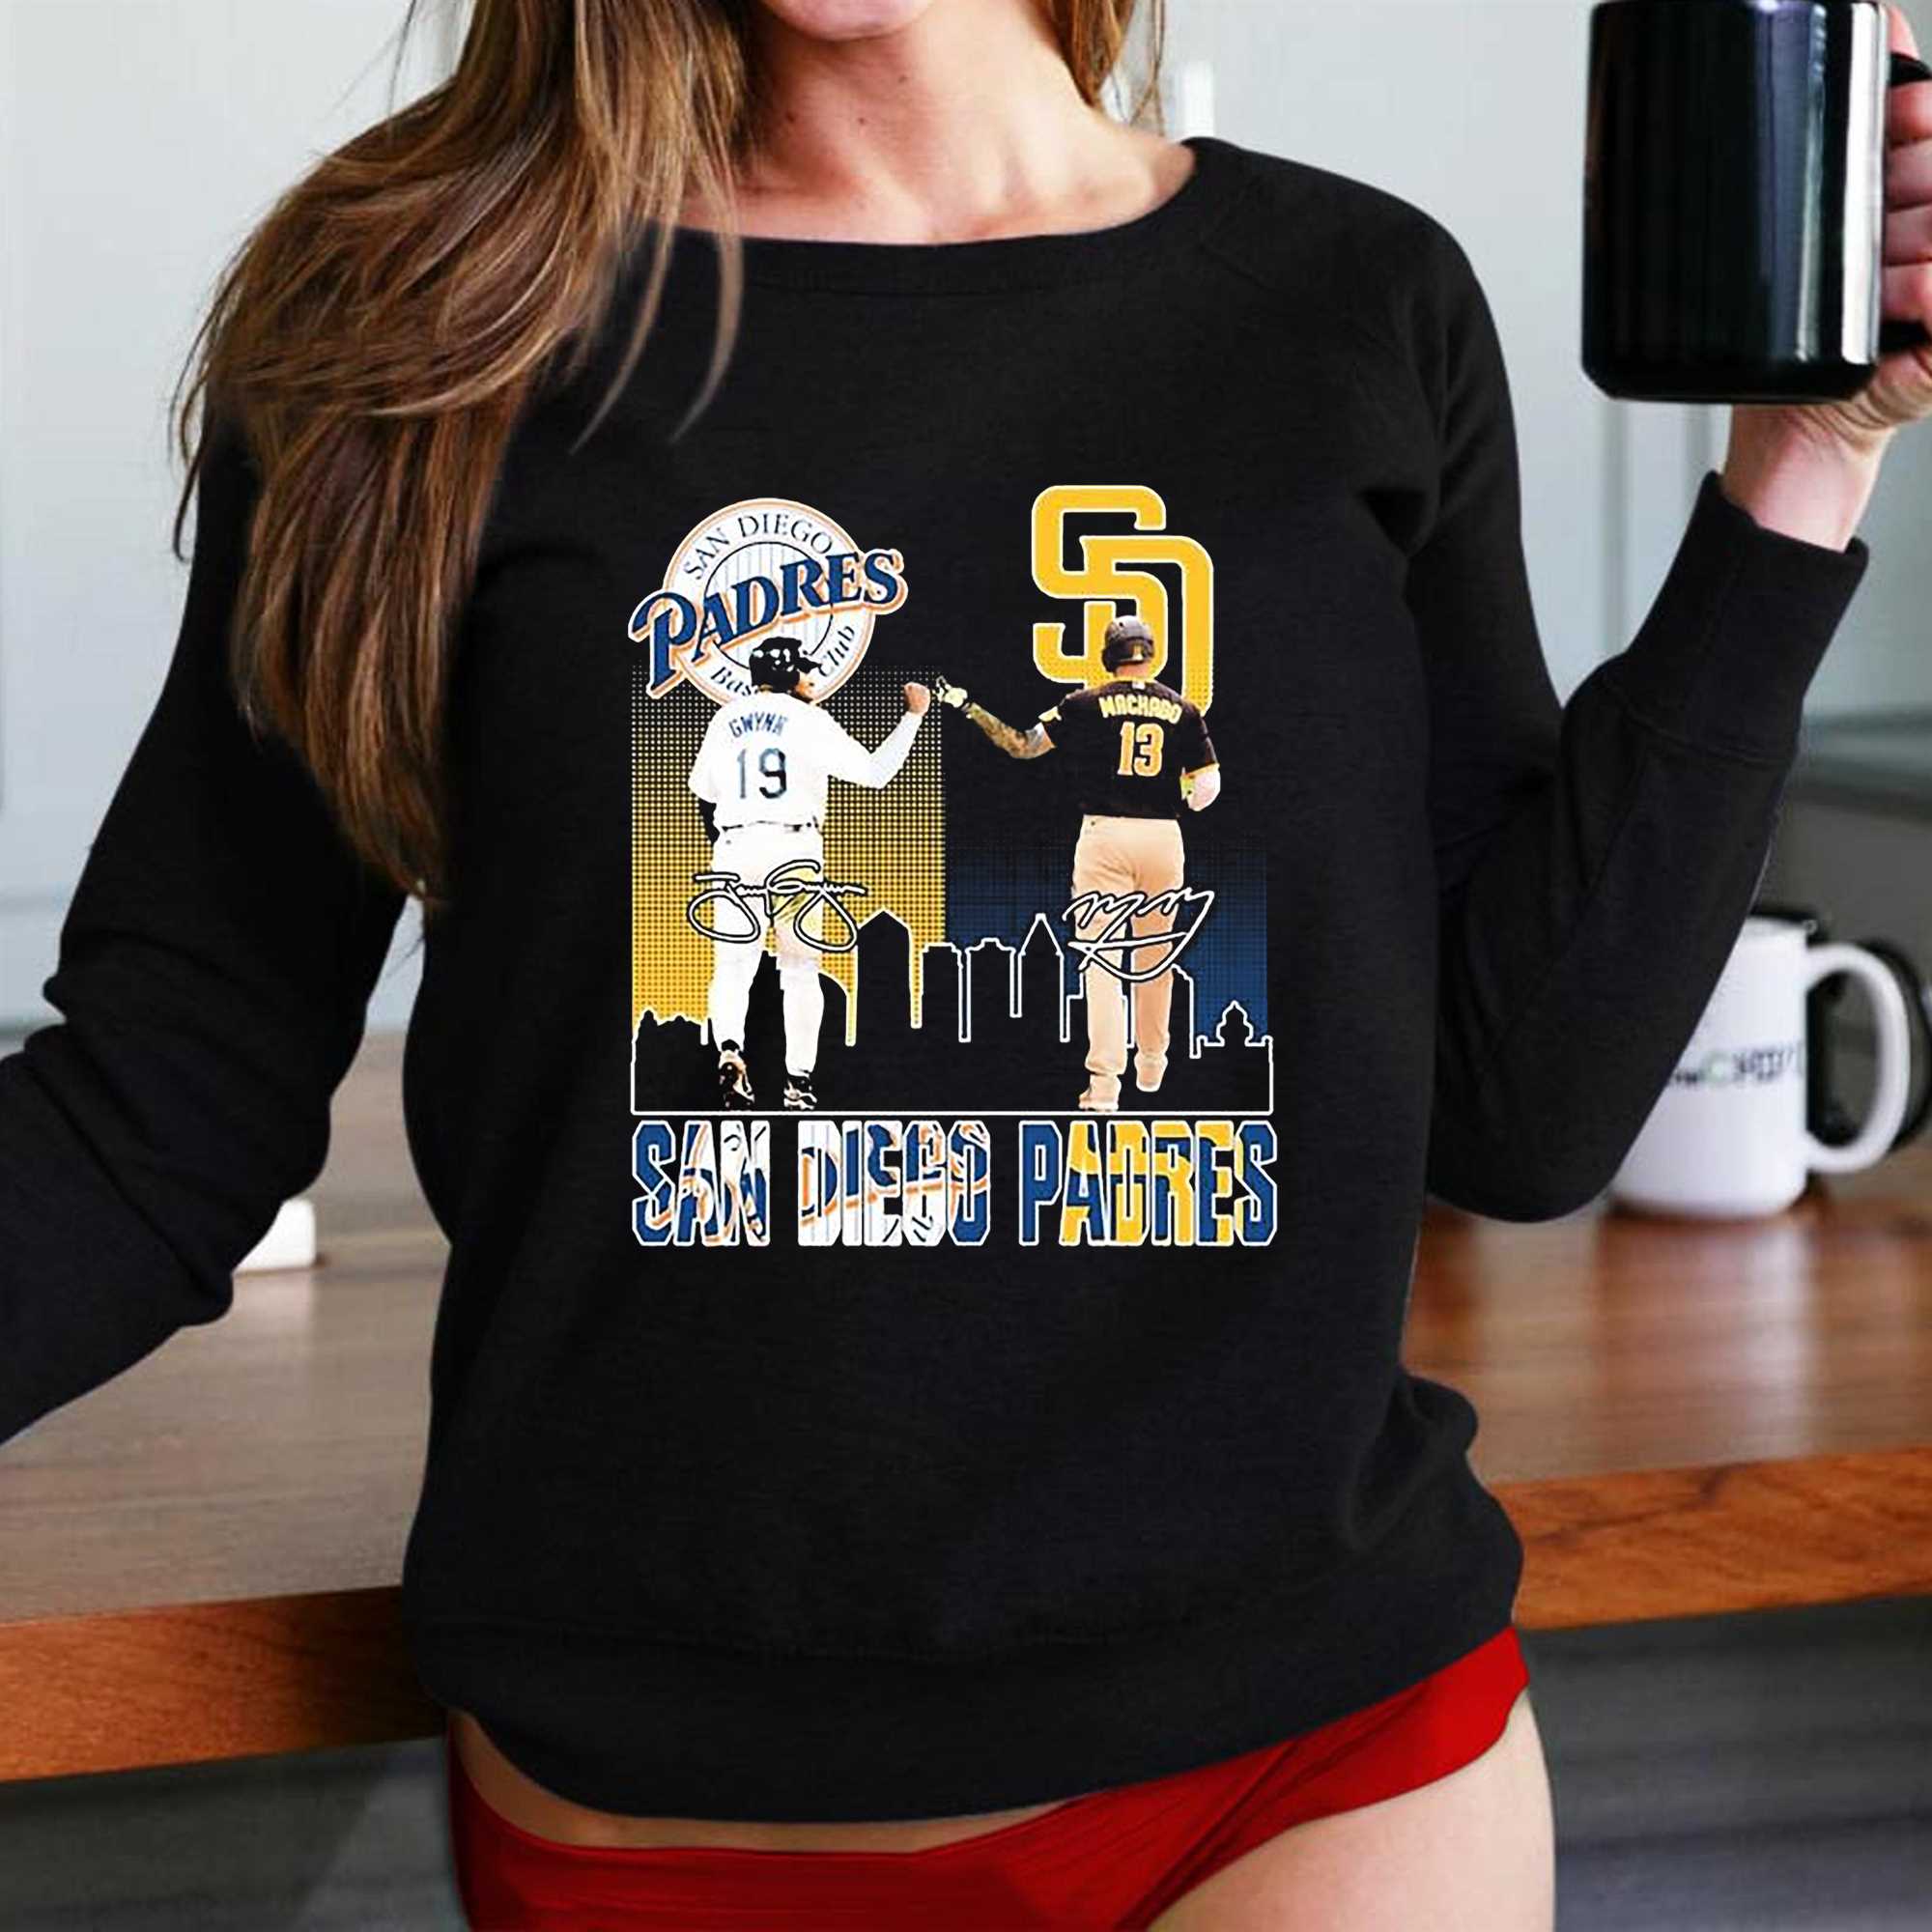 San Francisco City Of Champions Shirt 49ers Warriors And Giants - Shibtee  Clothing